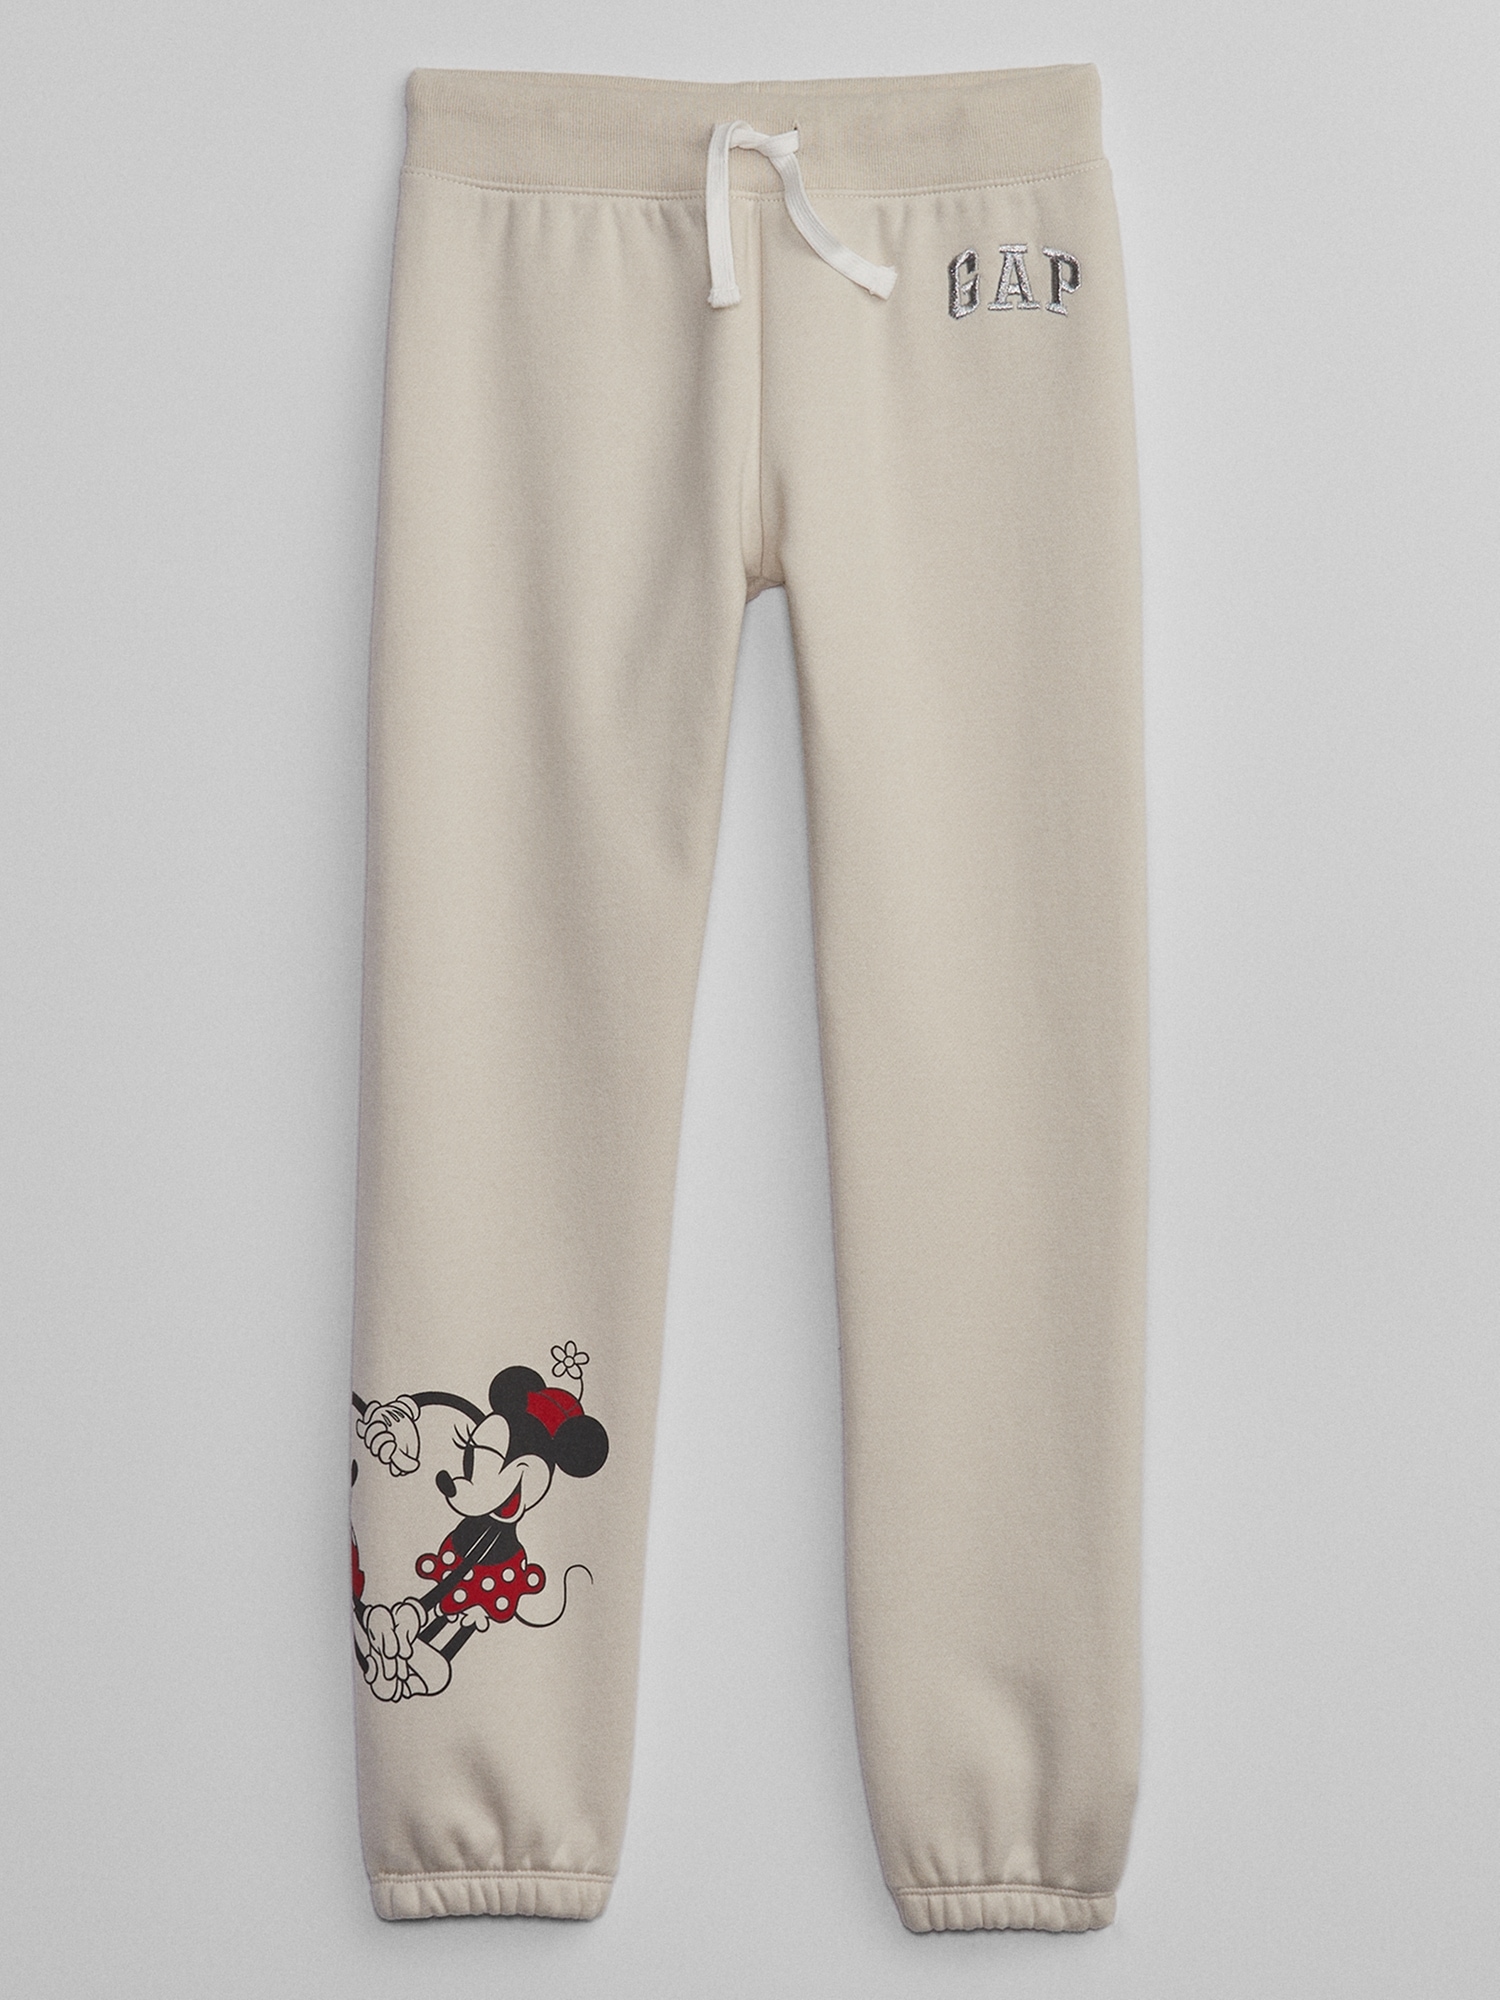 Disney Mickey Mouse Beige Sweatpants Womens Small